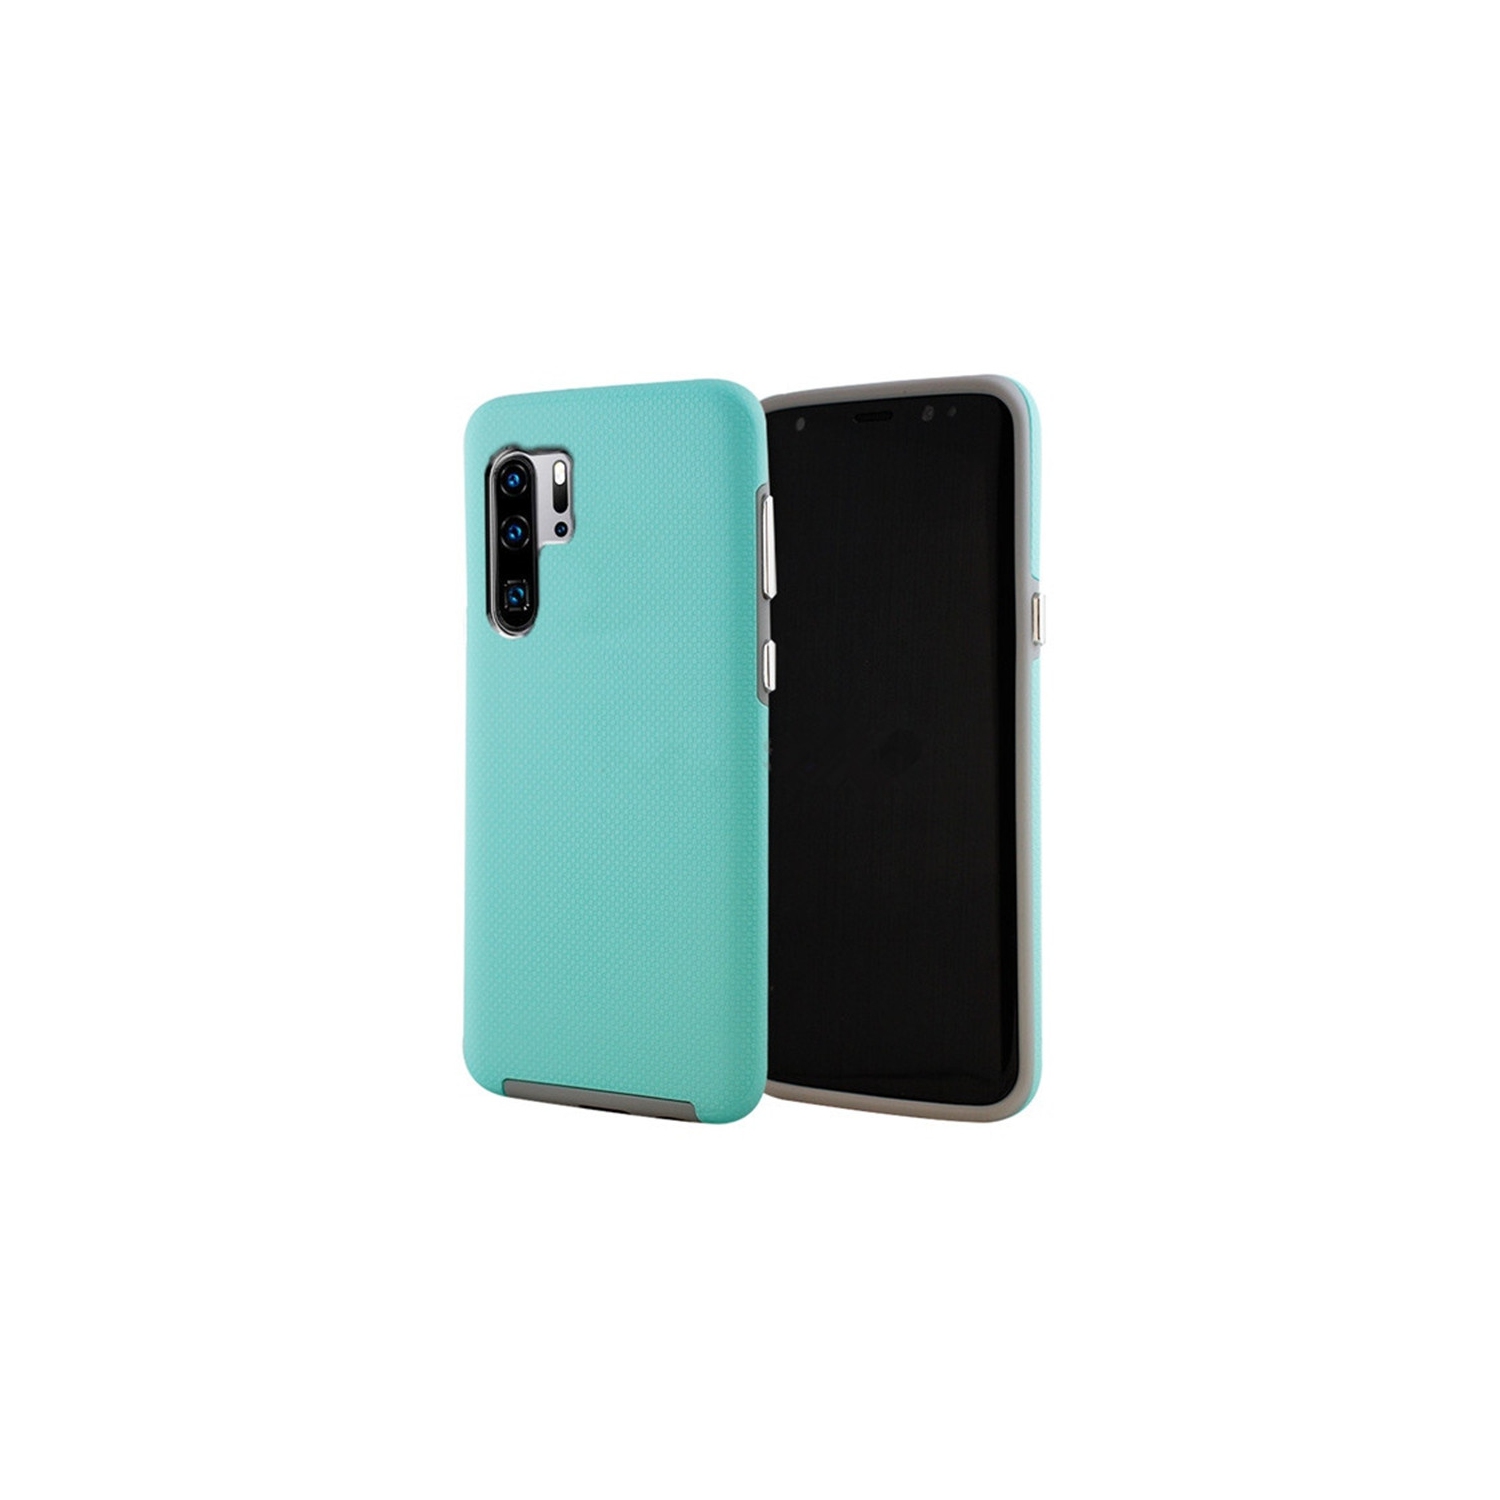 【CSmart】 Slim Fitted Hybrid Hard PC Shell Shockproof Scratch Resistant Case Cover for Samsung Galaxy Note 10 Plus, Mint